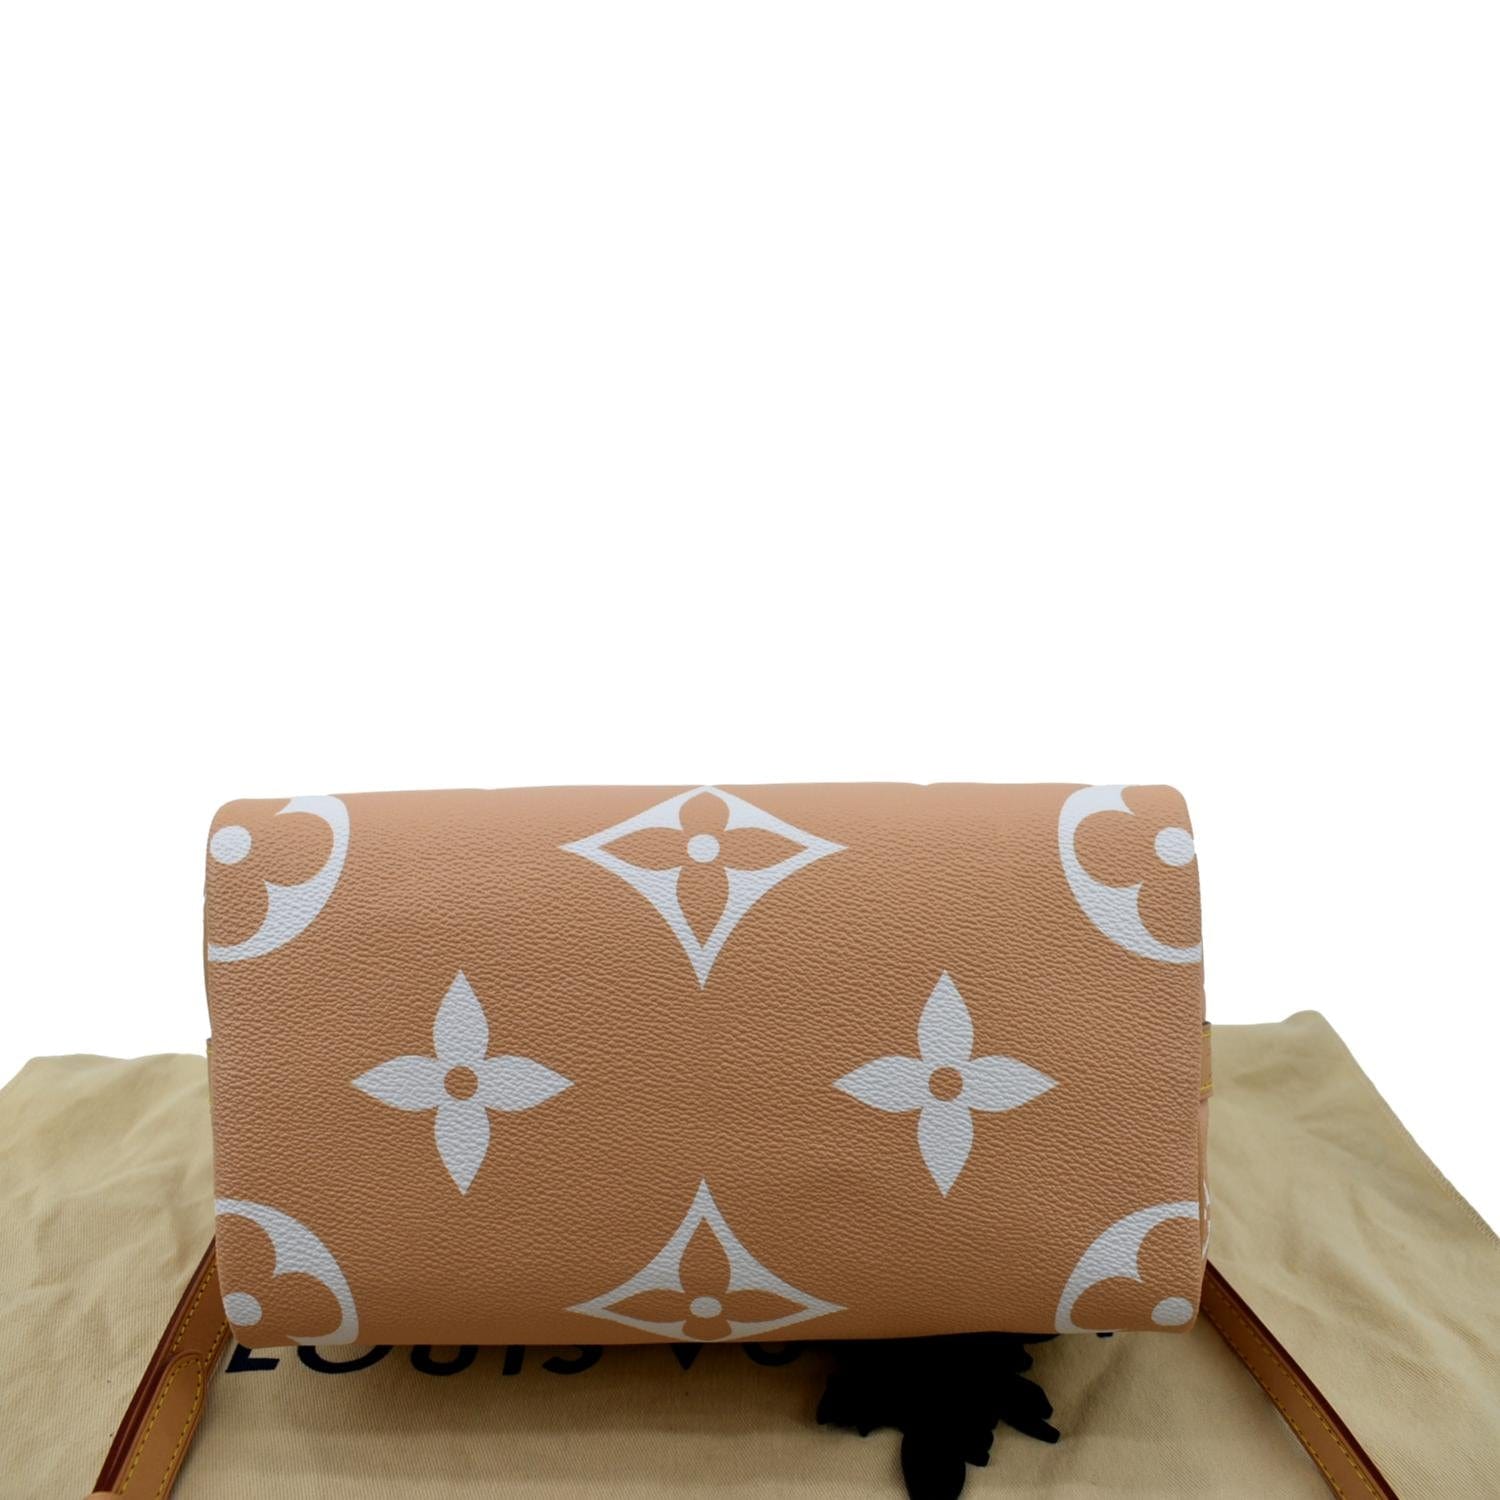 Louis Vuitton Limited Edition Brume Monogram Giant Canvas by The Pool Speedy Bandouliere 25 Bag